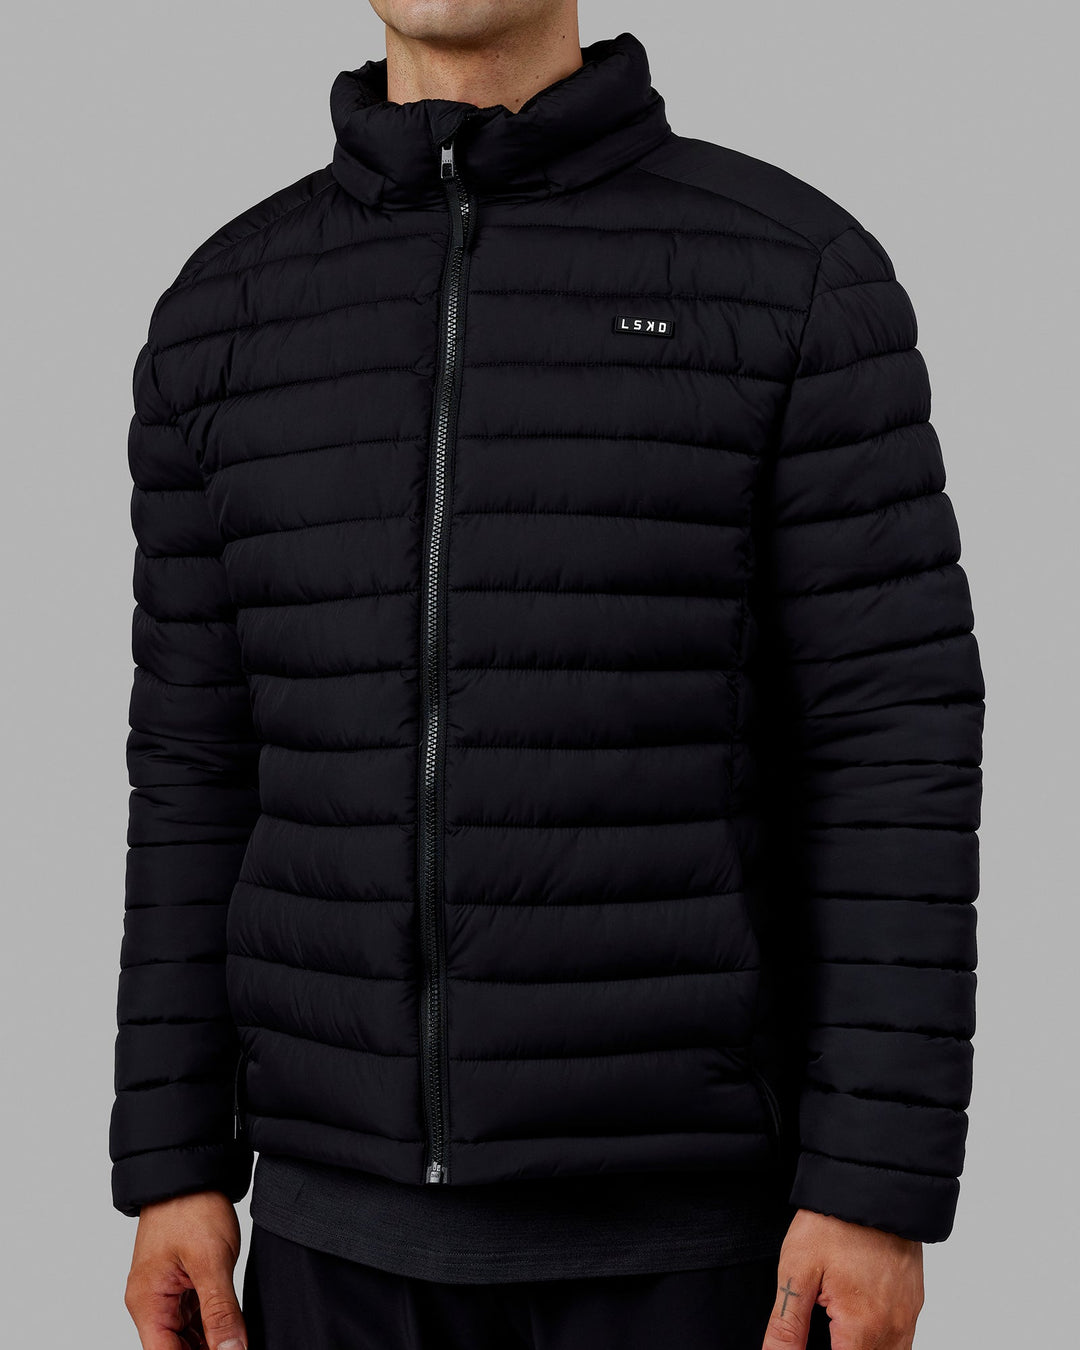 All Day Puffer Jacket - Black